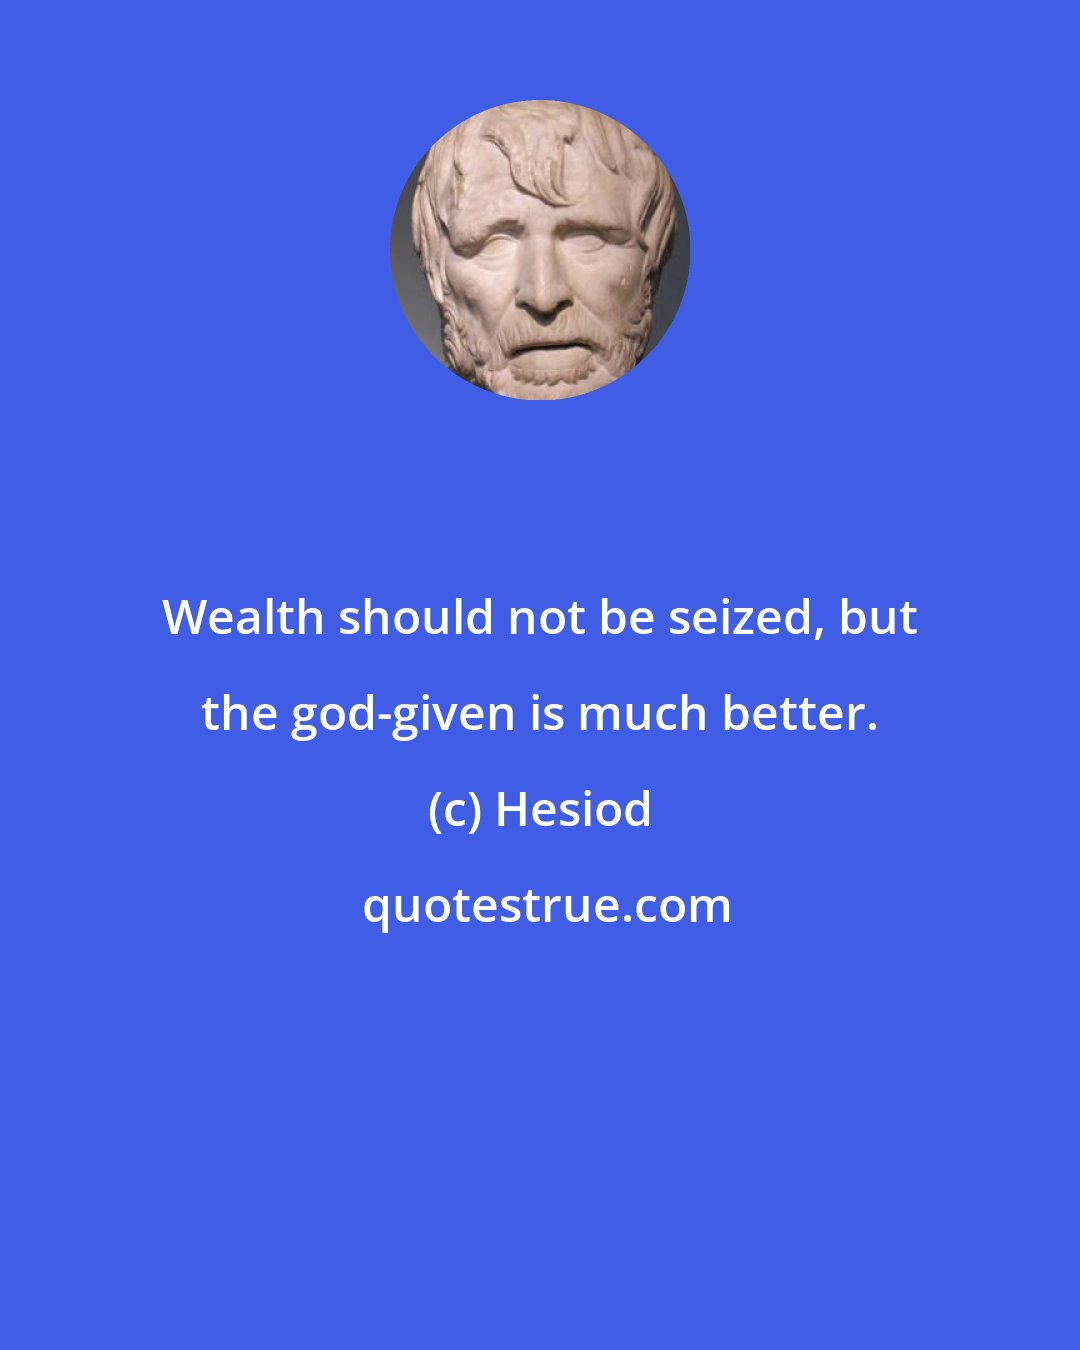 Hesiod: Wealth should not be seized, but the god-given is much better.